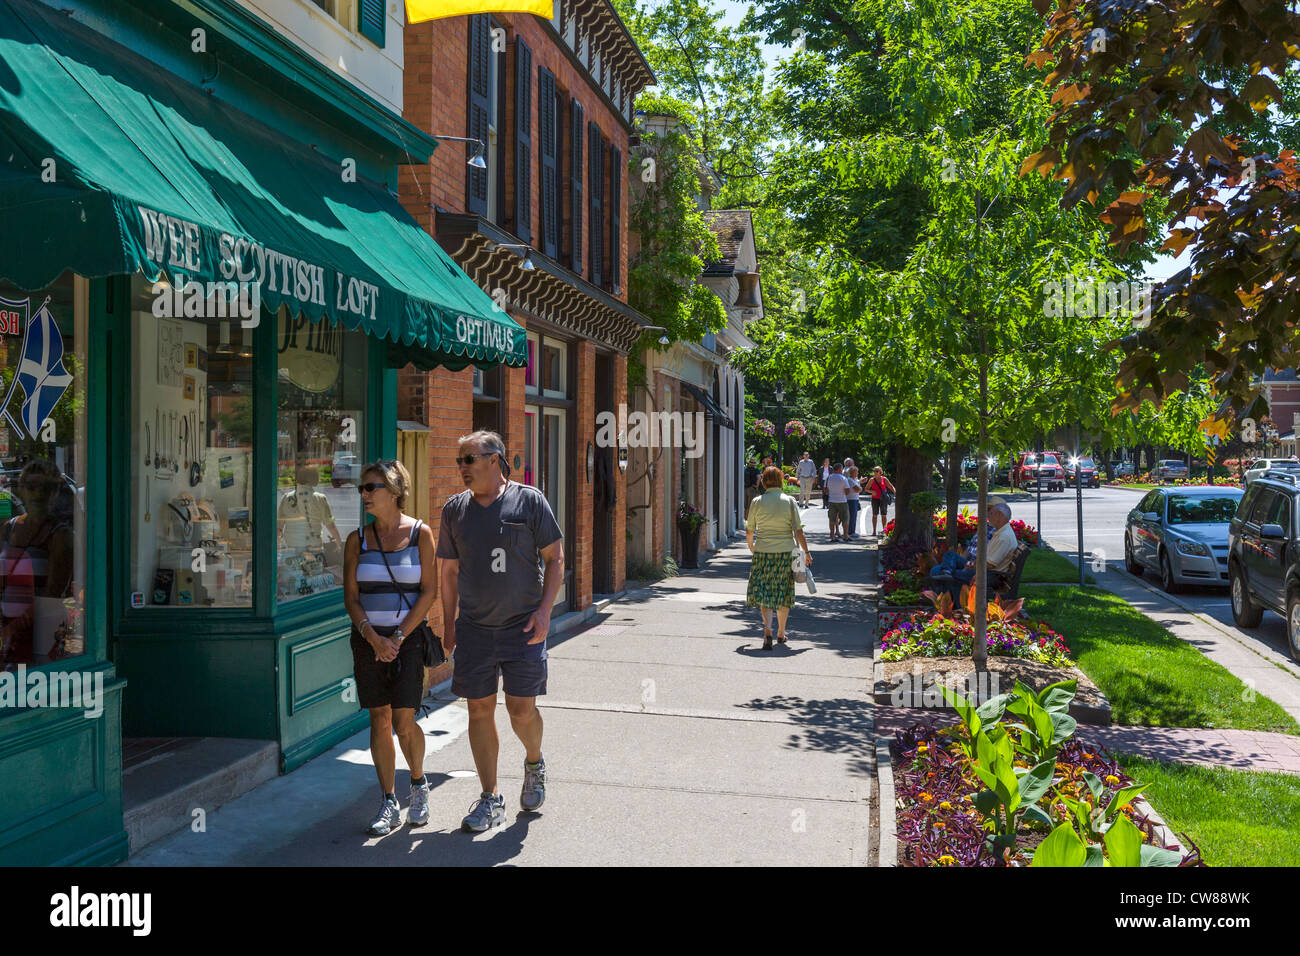 Shops on Queen Street in the historic town centre, Niagara-on-the-Lake, Ontario, Canada Stock Photo